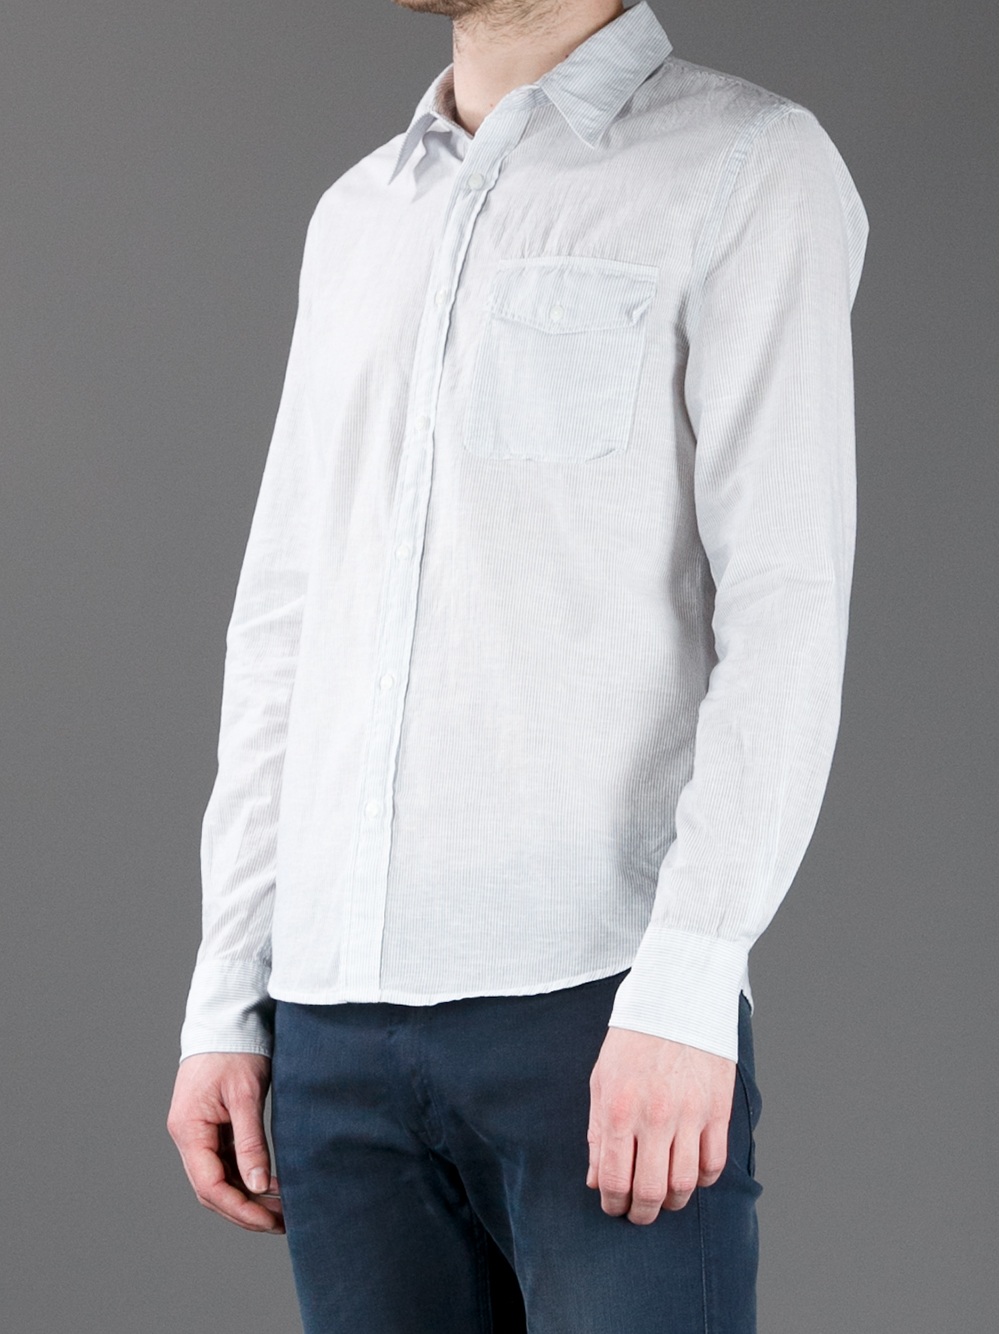 Lyst - B.D. Baggies Foundry Shirt in White for Men